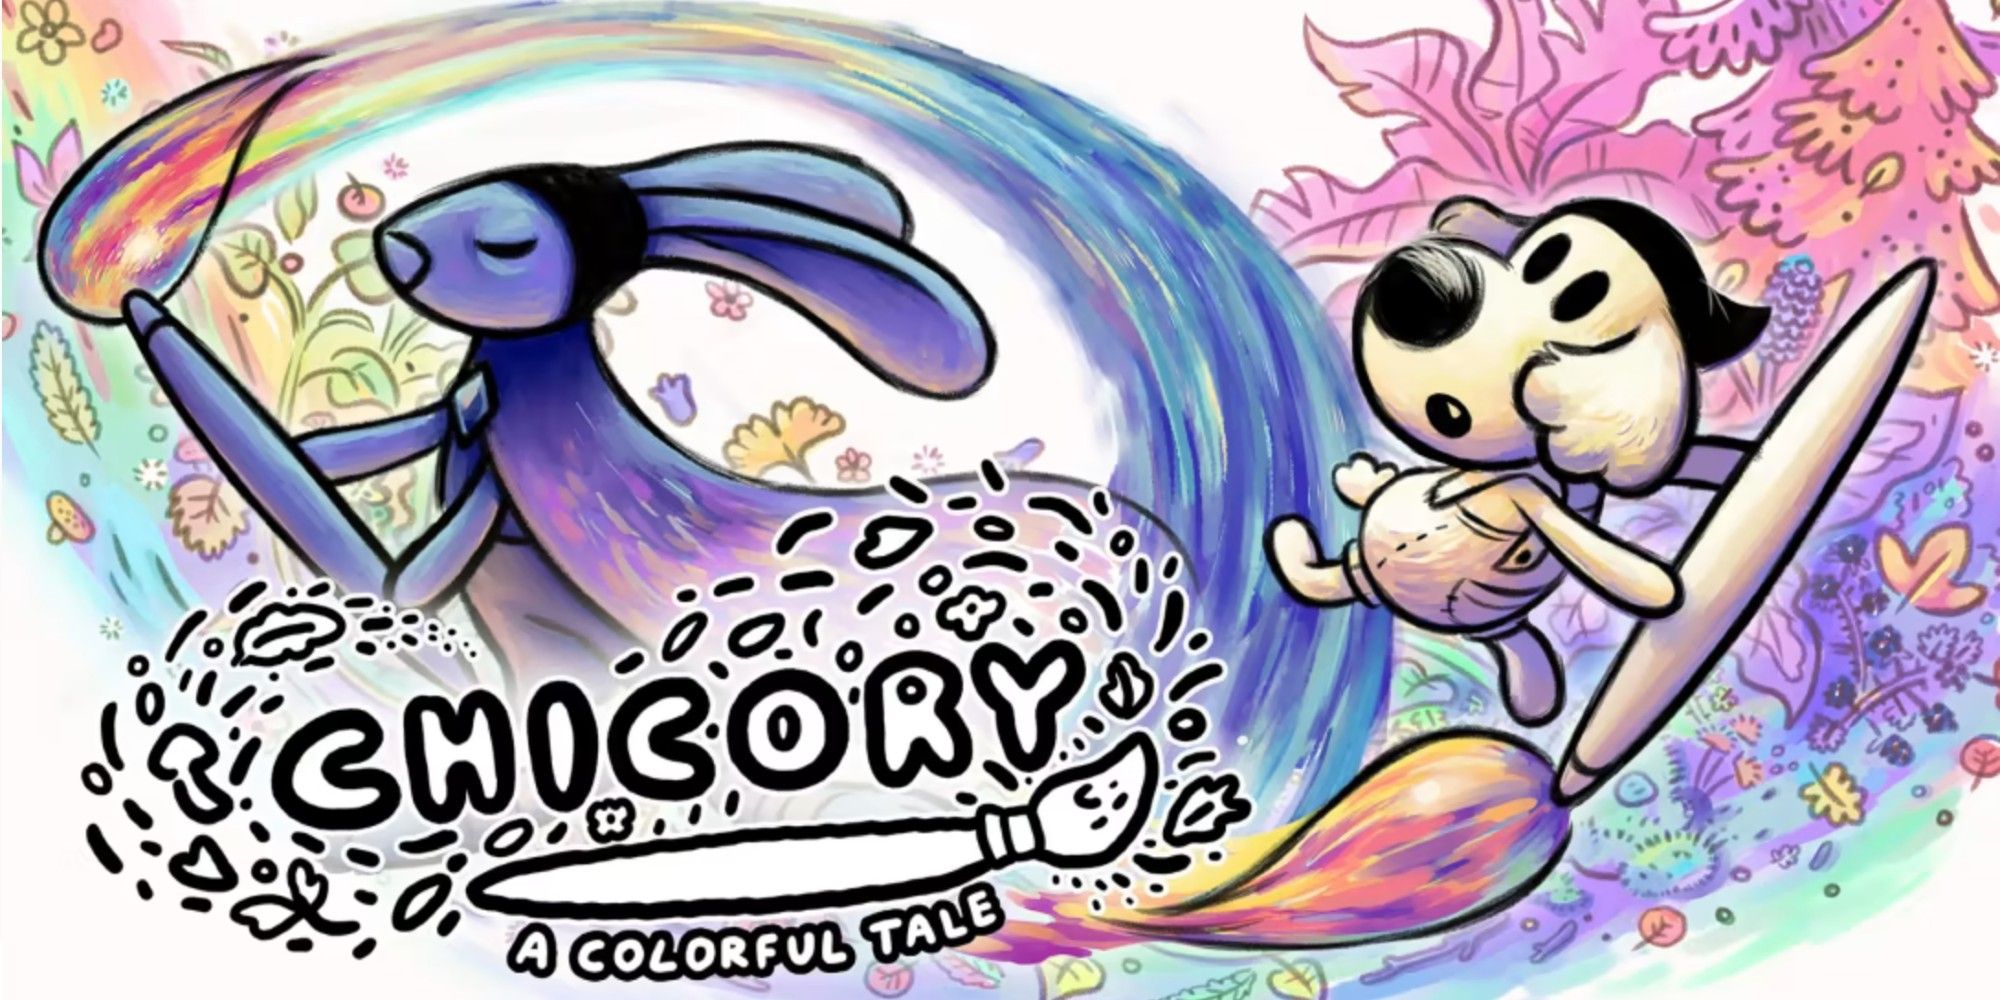 Chicory_A Colorful Tale_Nintendo Switch